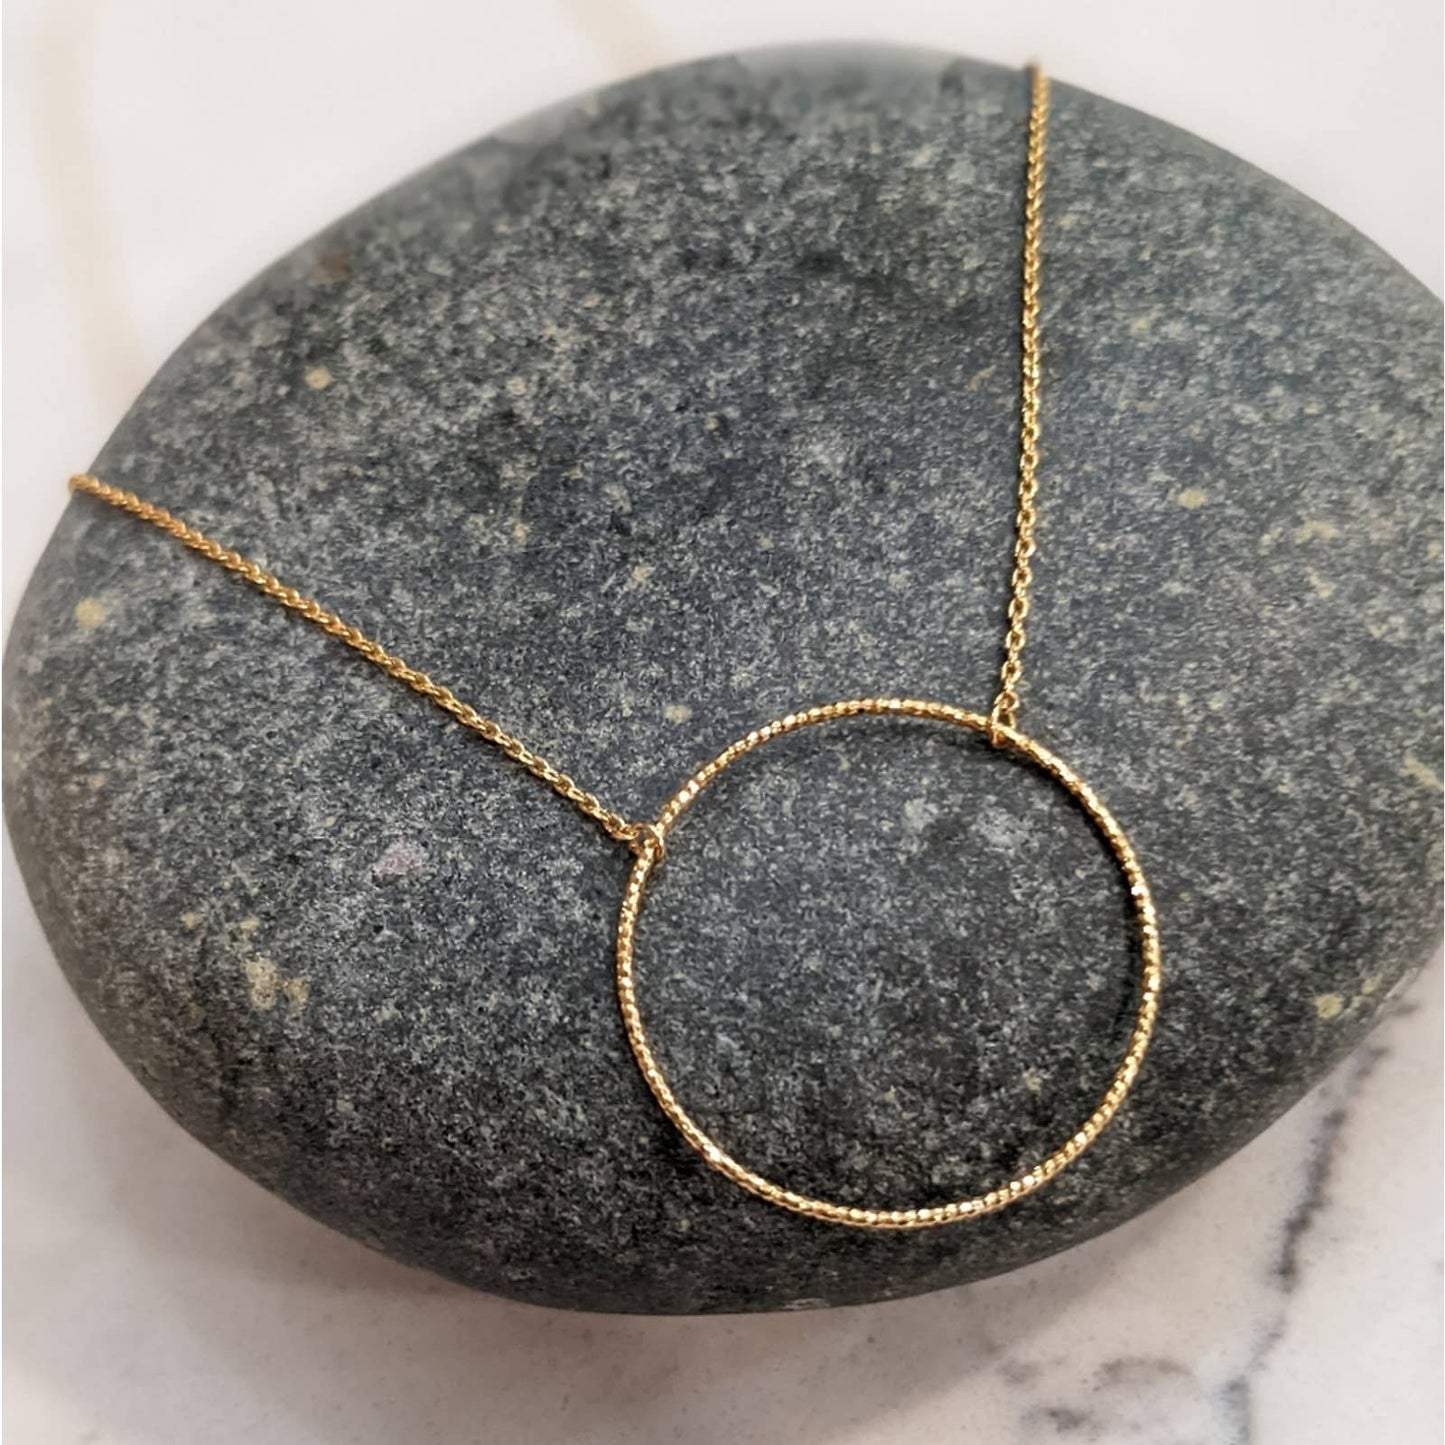 Dainty Gold Circle Necklace with a Hint of Sparkle